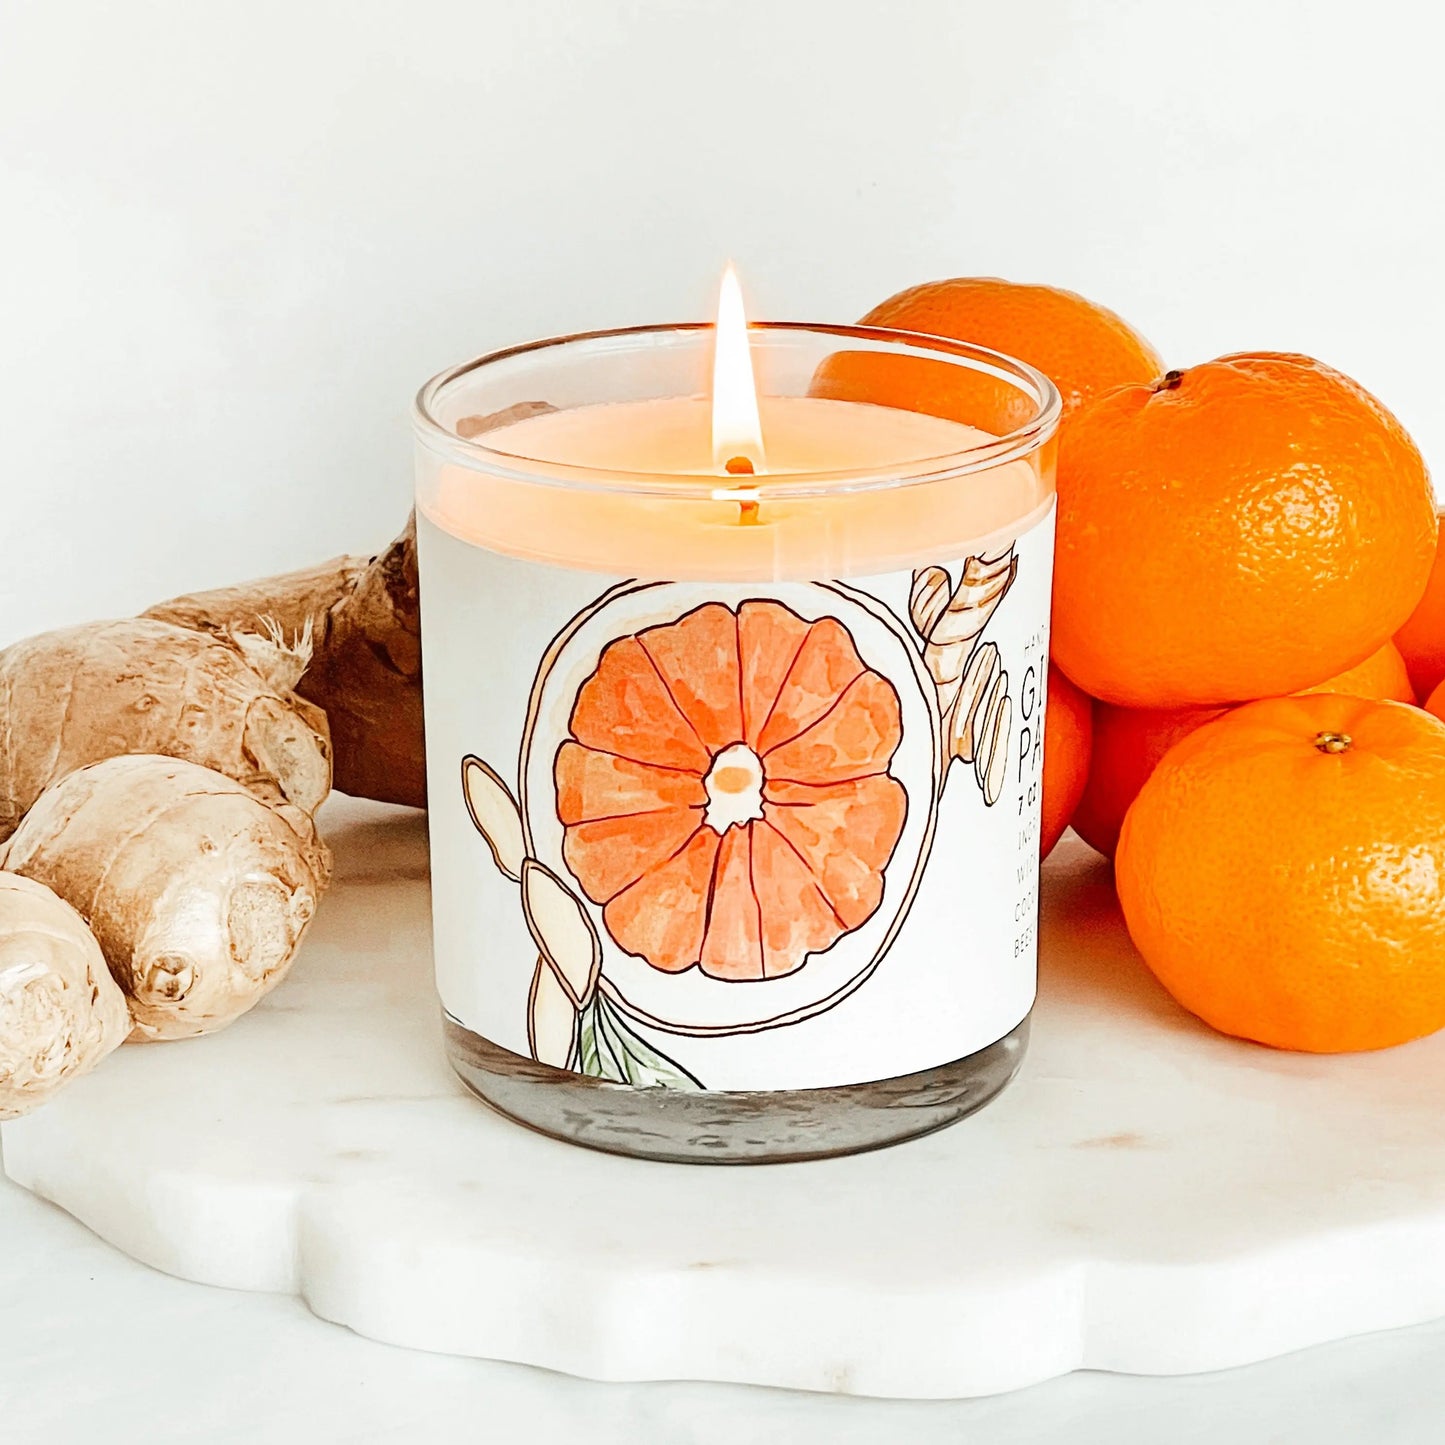 Ginger Pamplemousse - Just Bee Candles Just Bee Cosmetics